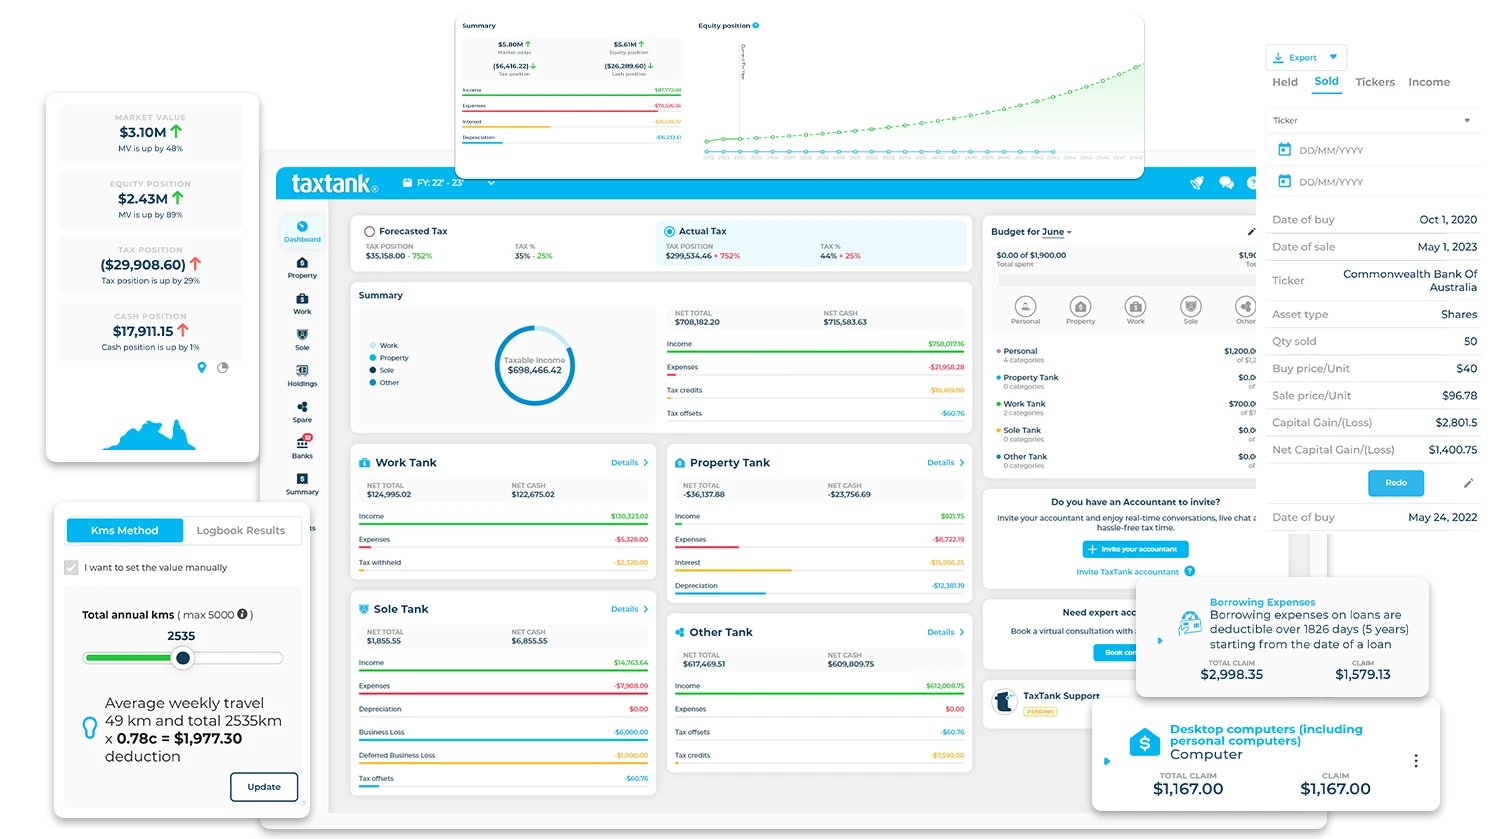 Personal finance software showing all features from the dashboard